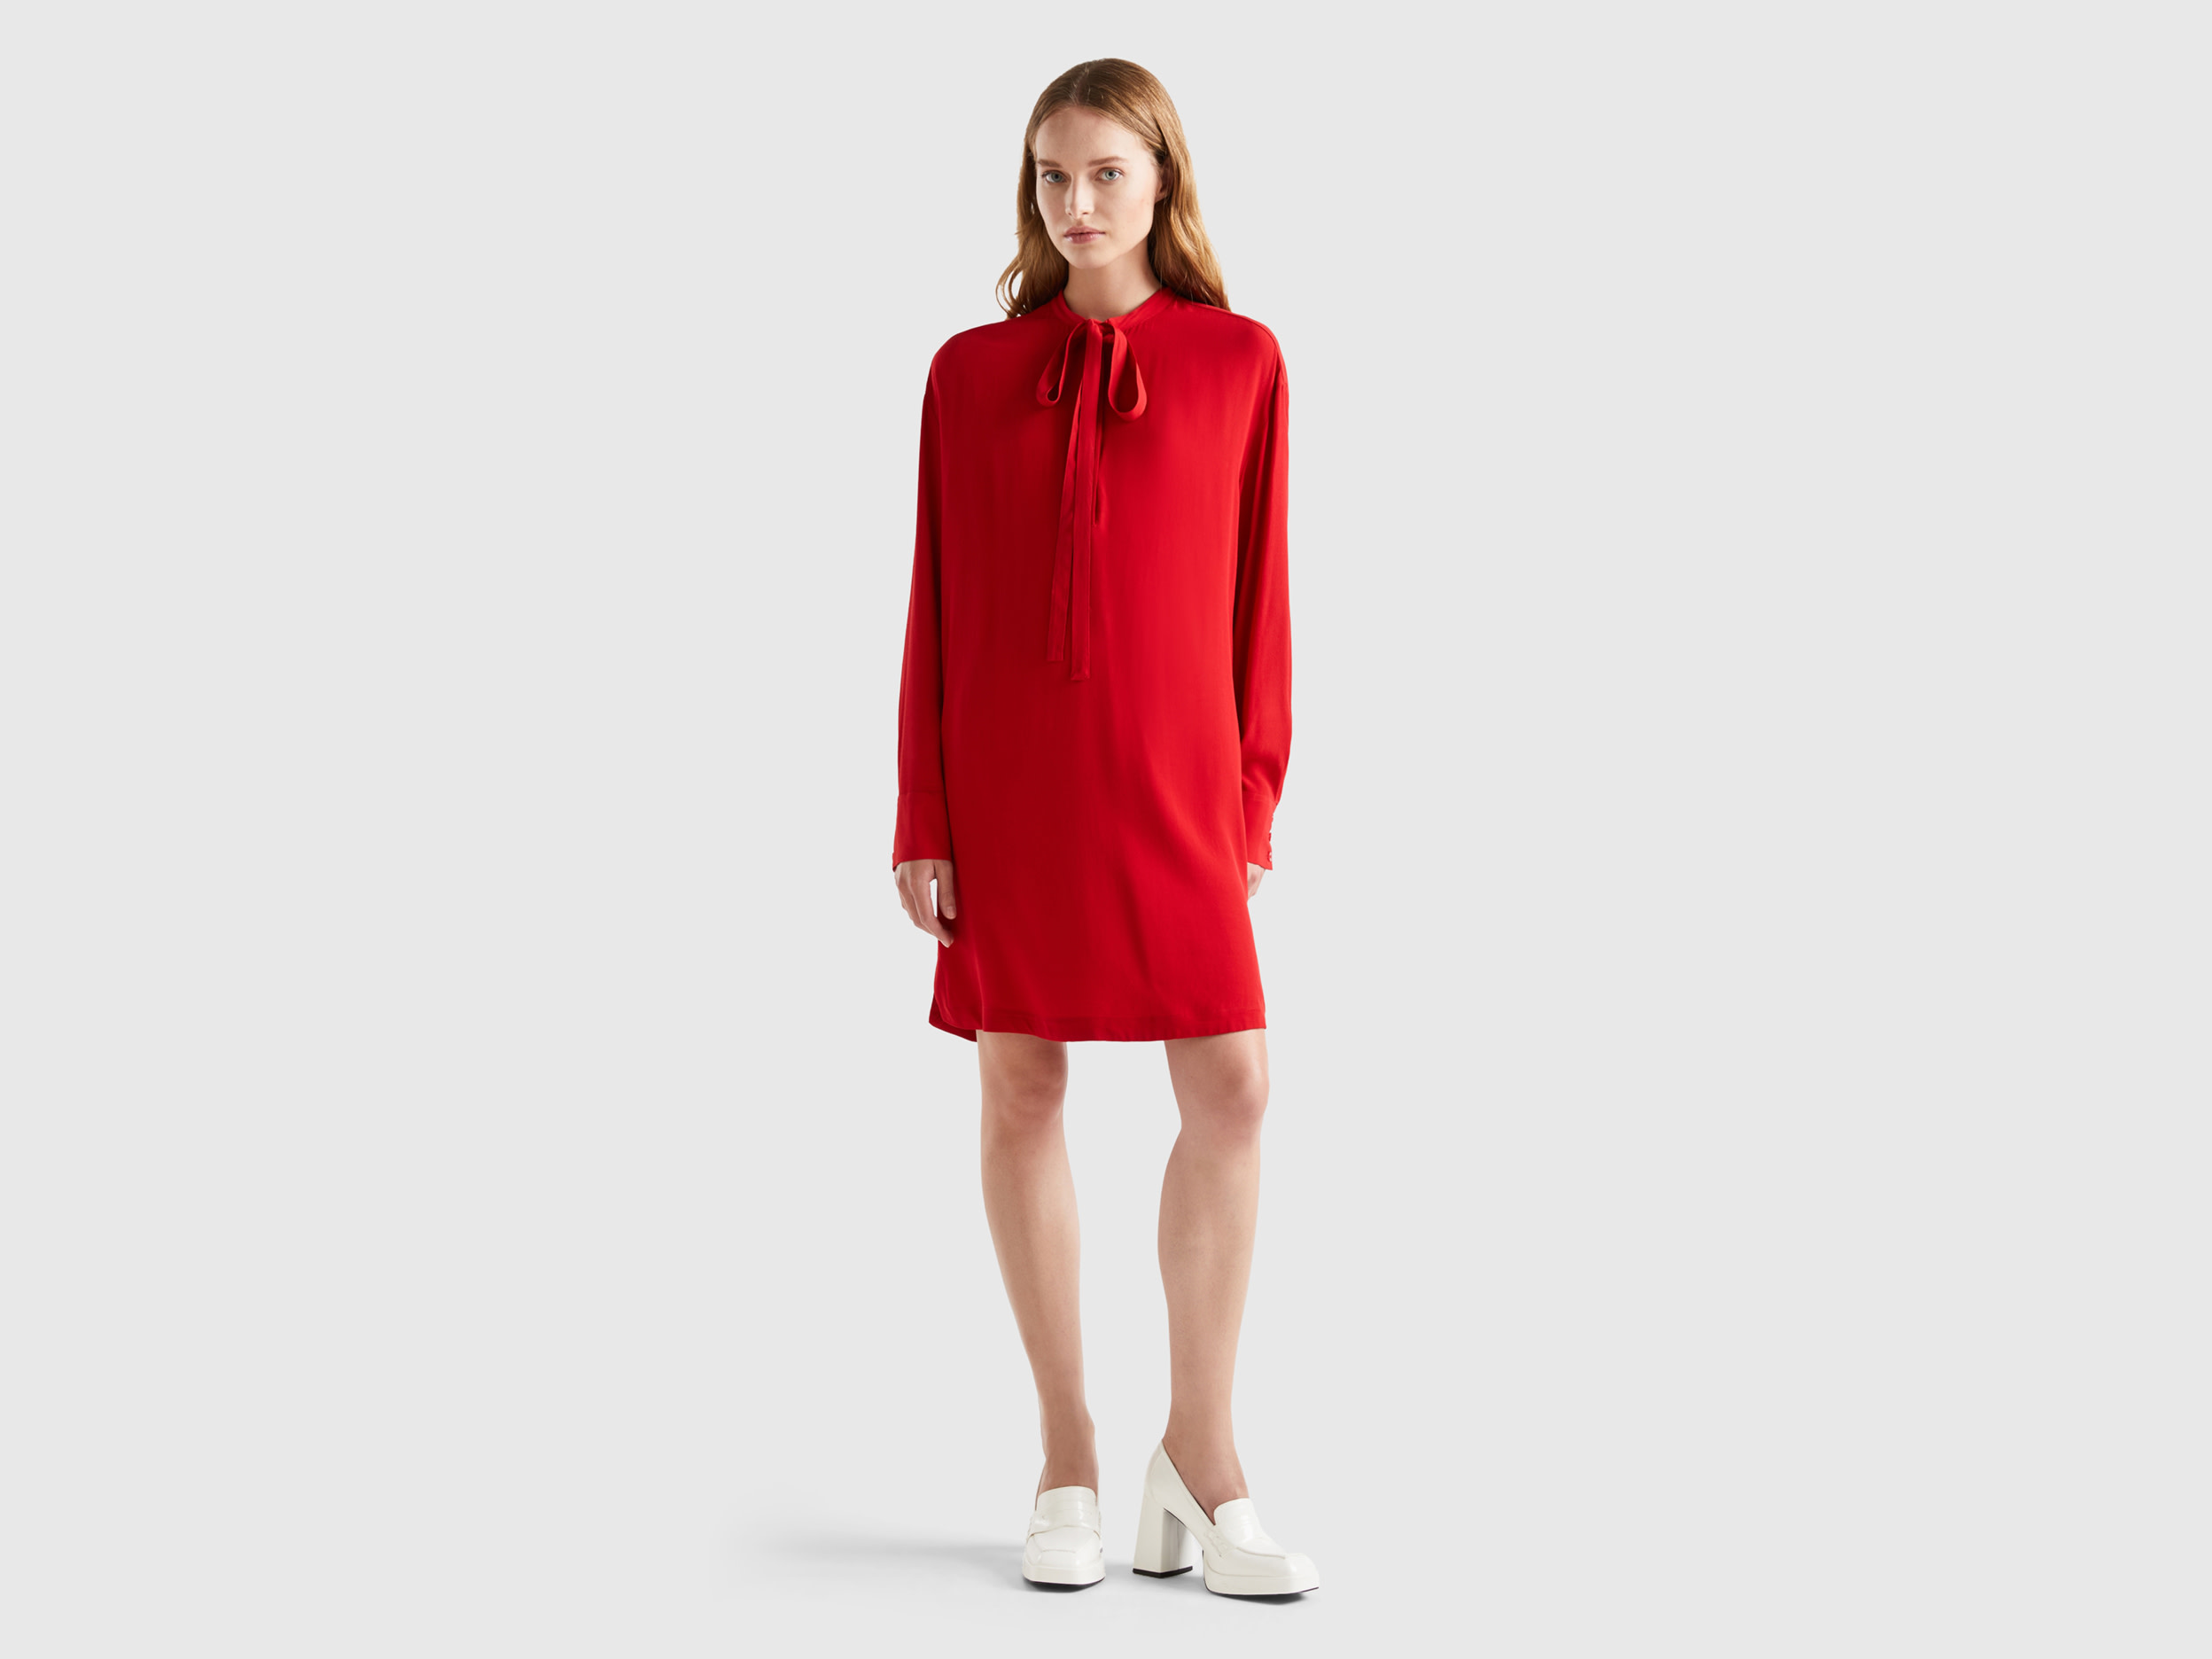 Benetton, Short Dress With Laces, size S, Red, Women